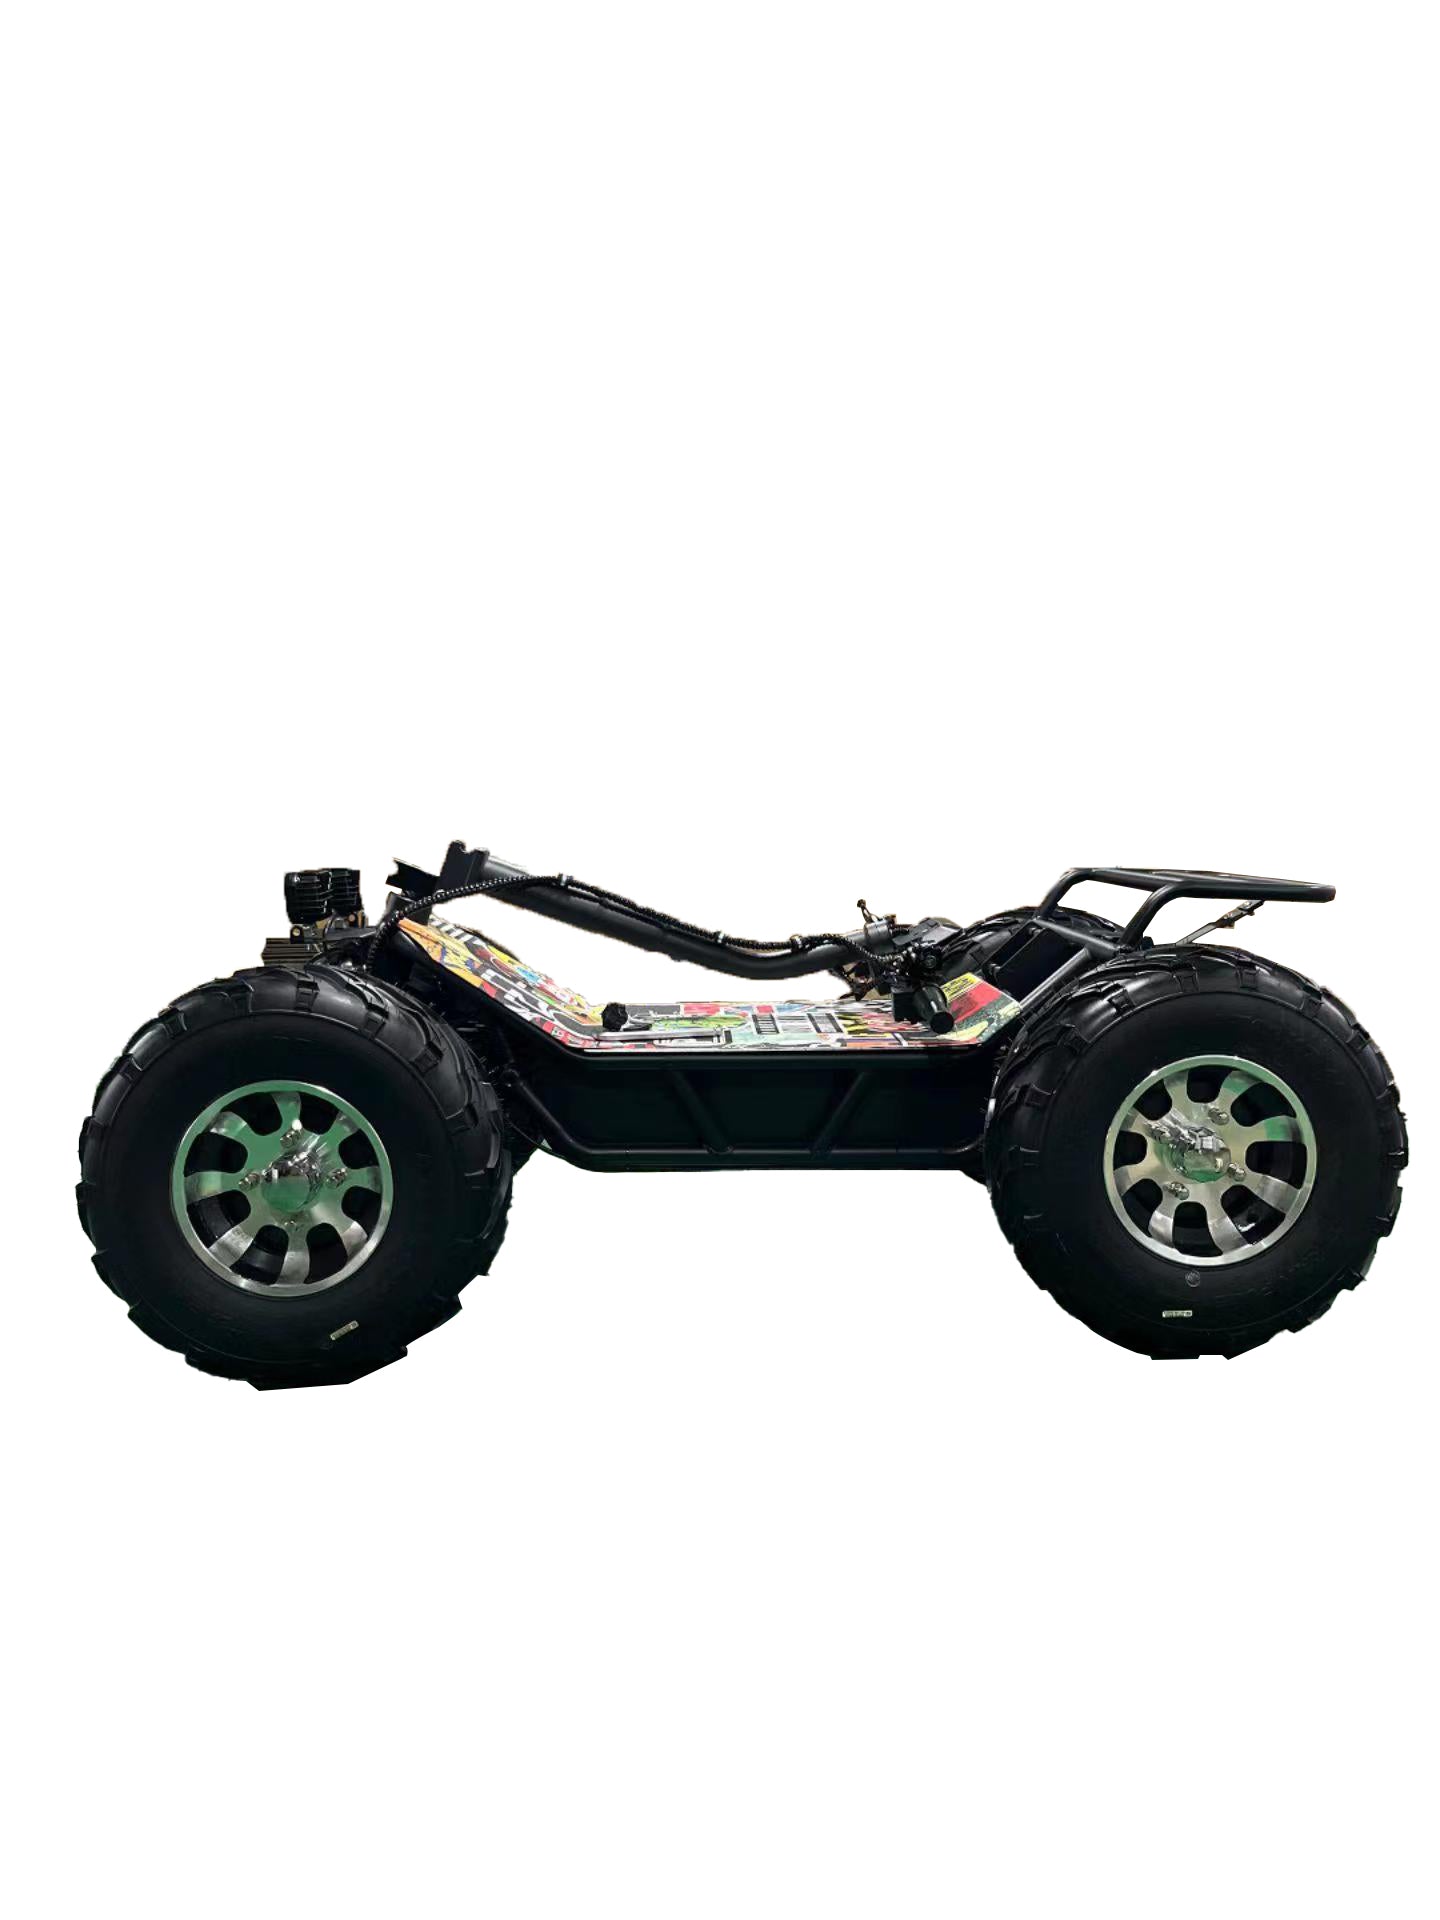 ESWING 8000W ATV Off Road Electric Scooter